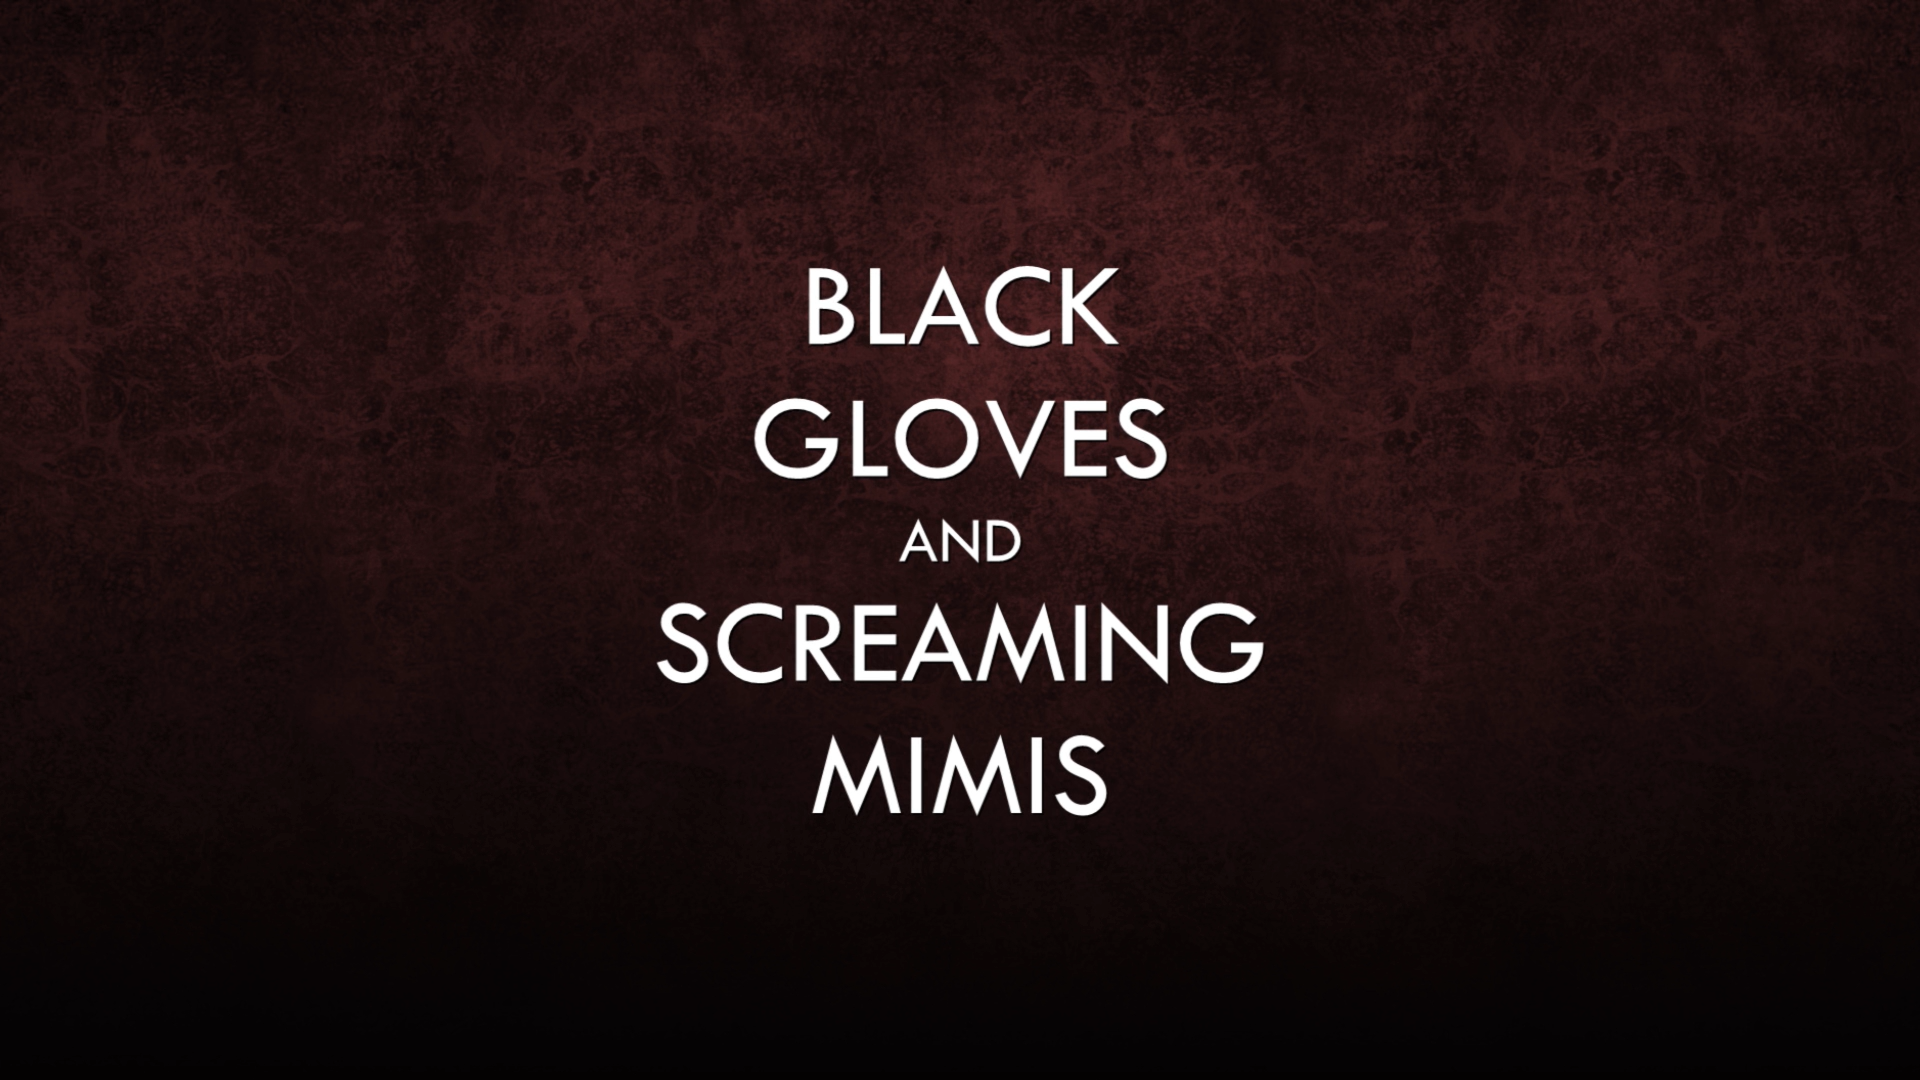 Black Gloves and Screaming Mimis